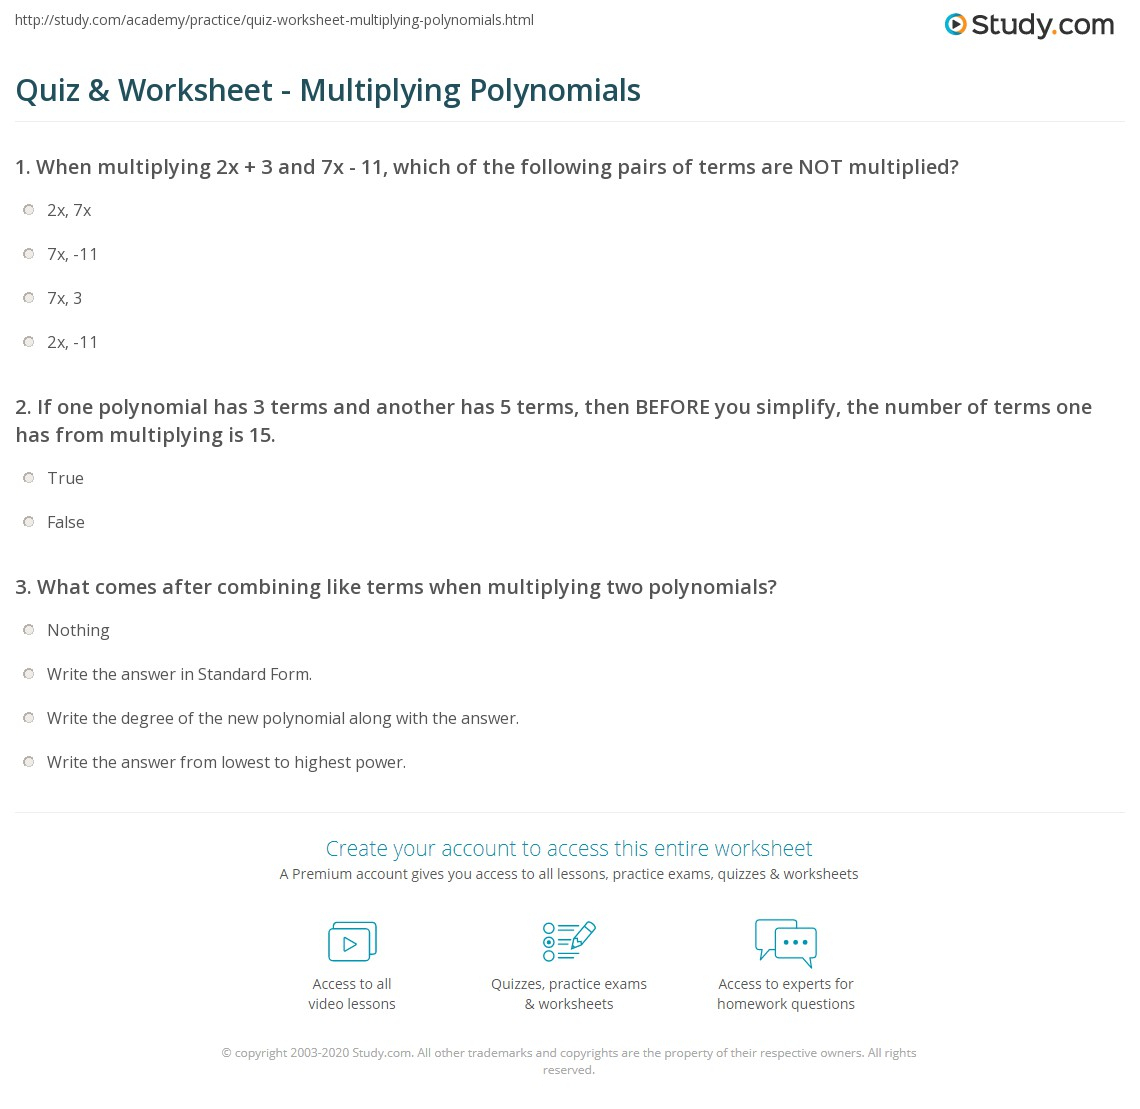 Worksheets About Multiplication Of Polynomials Printable Multiplication Flash Cards